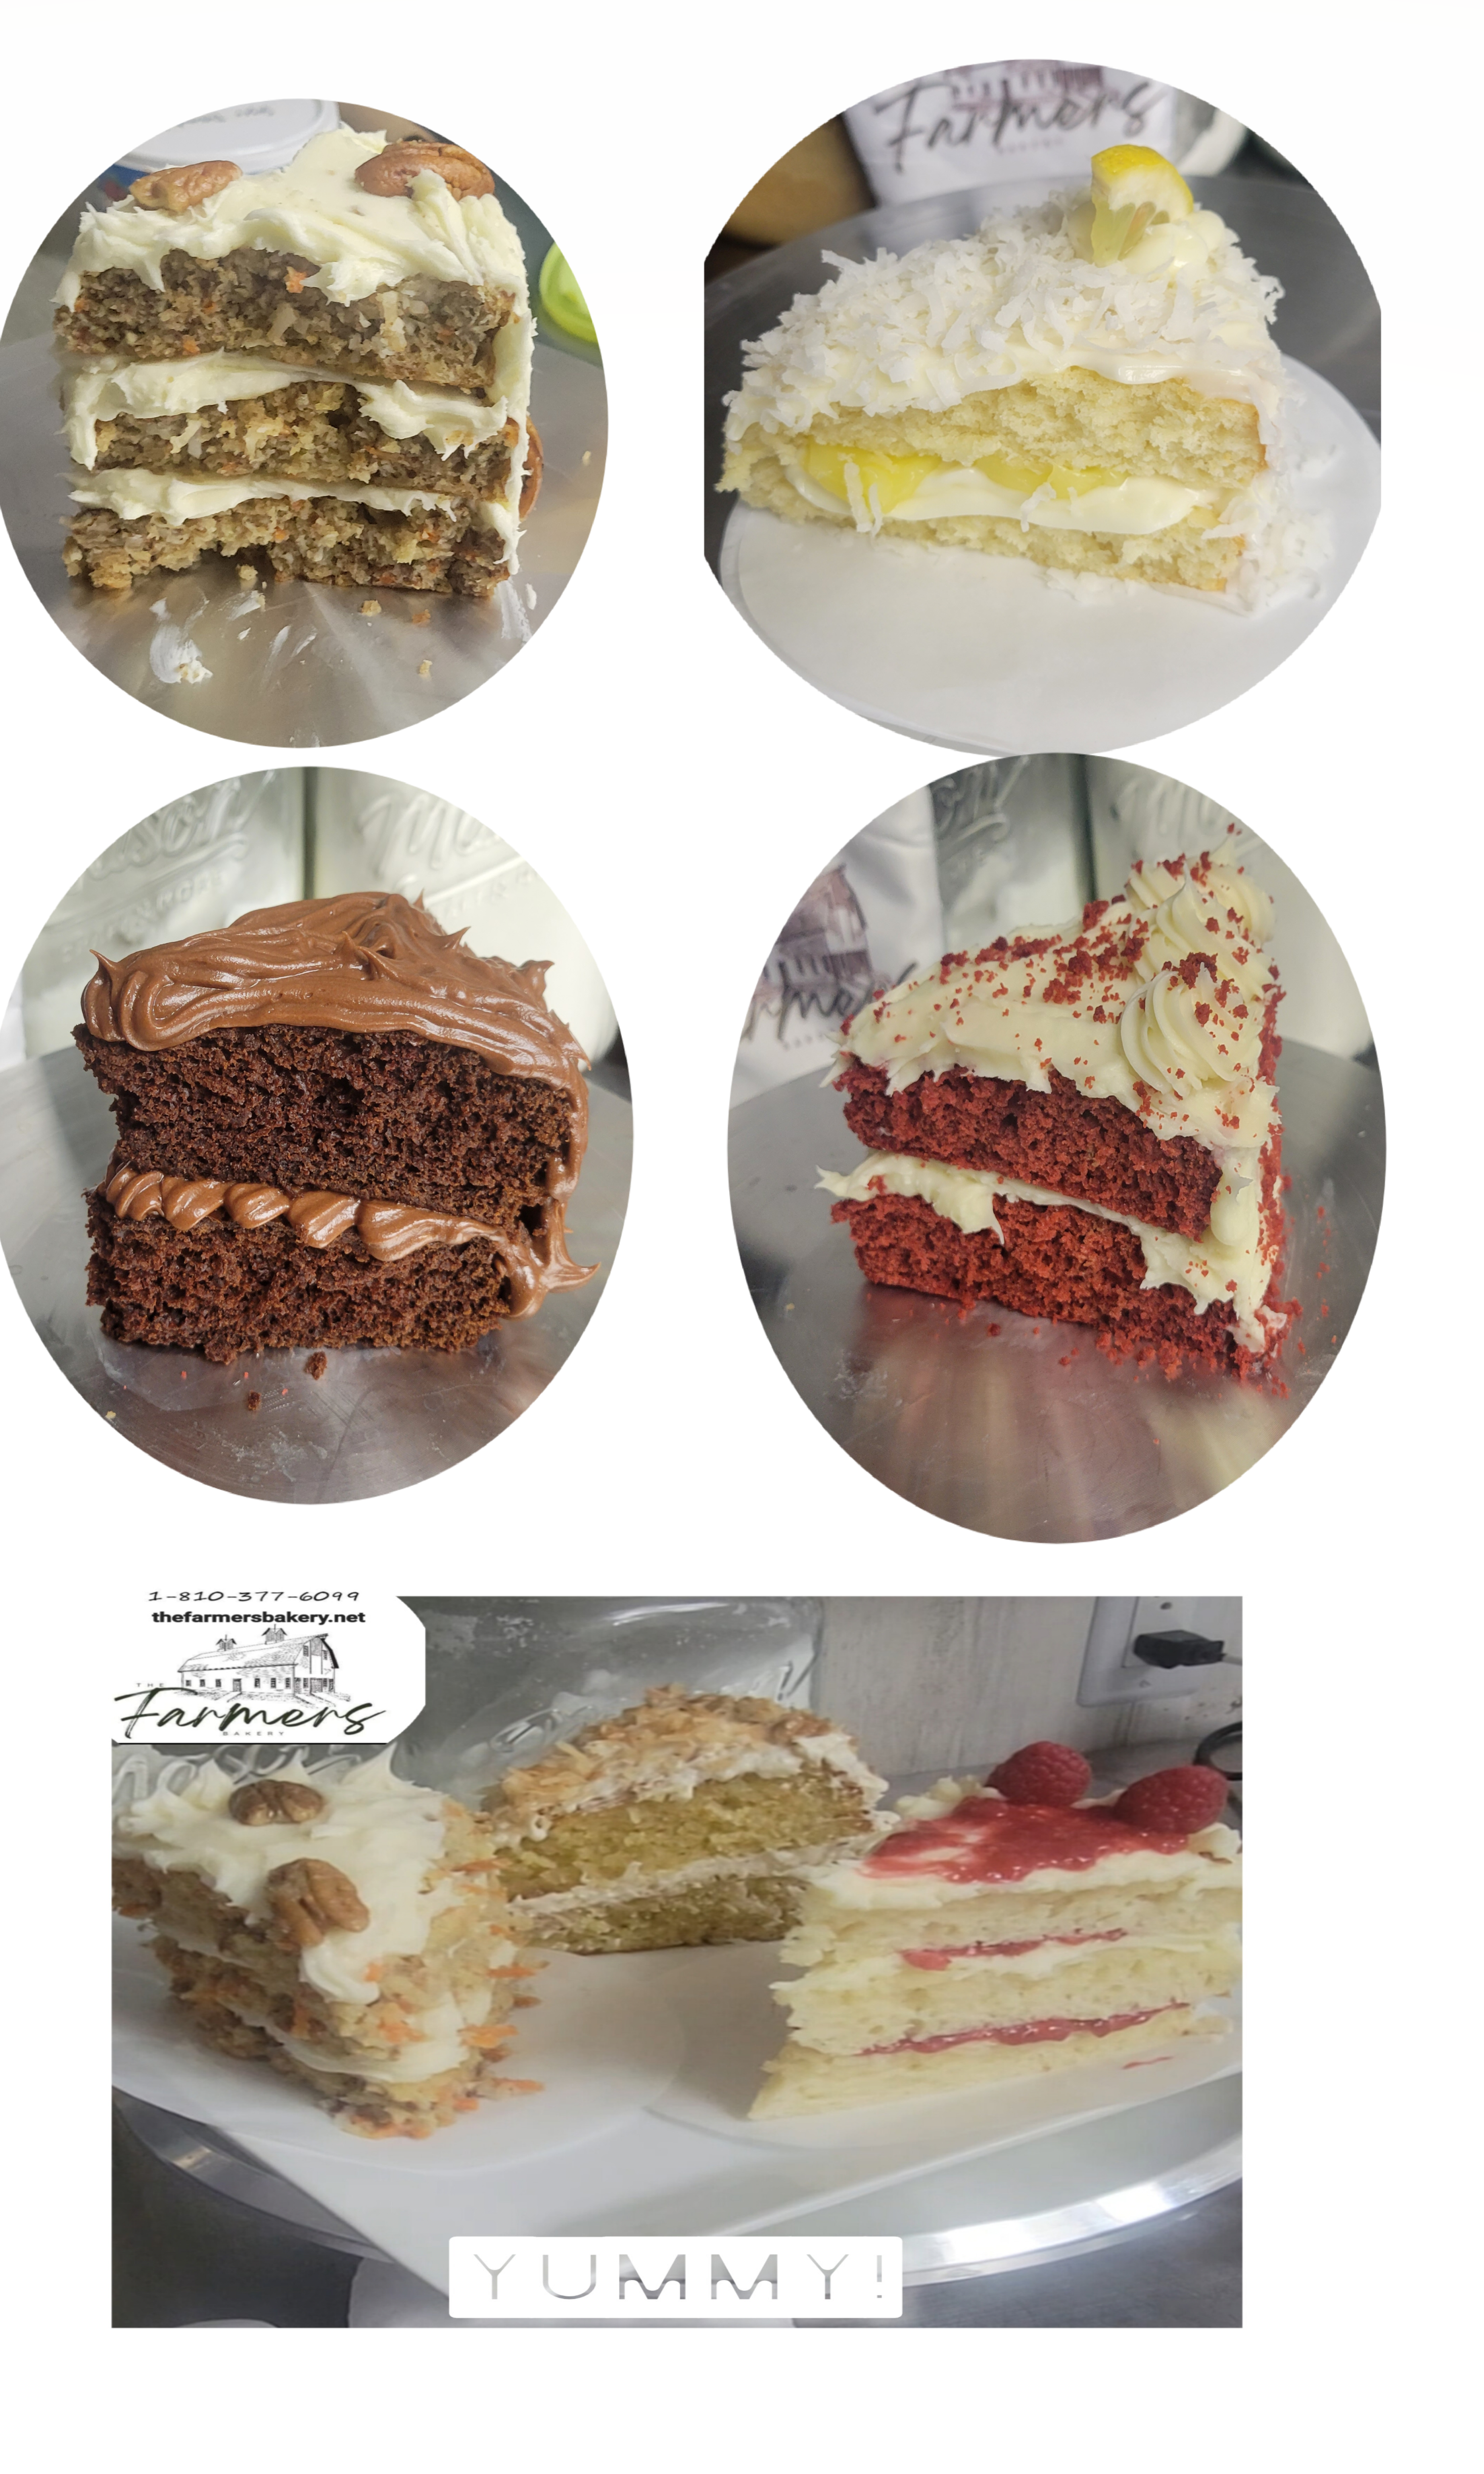 Chiquitas Cakes and Confections